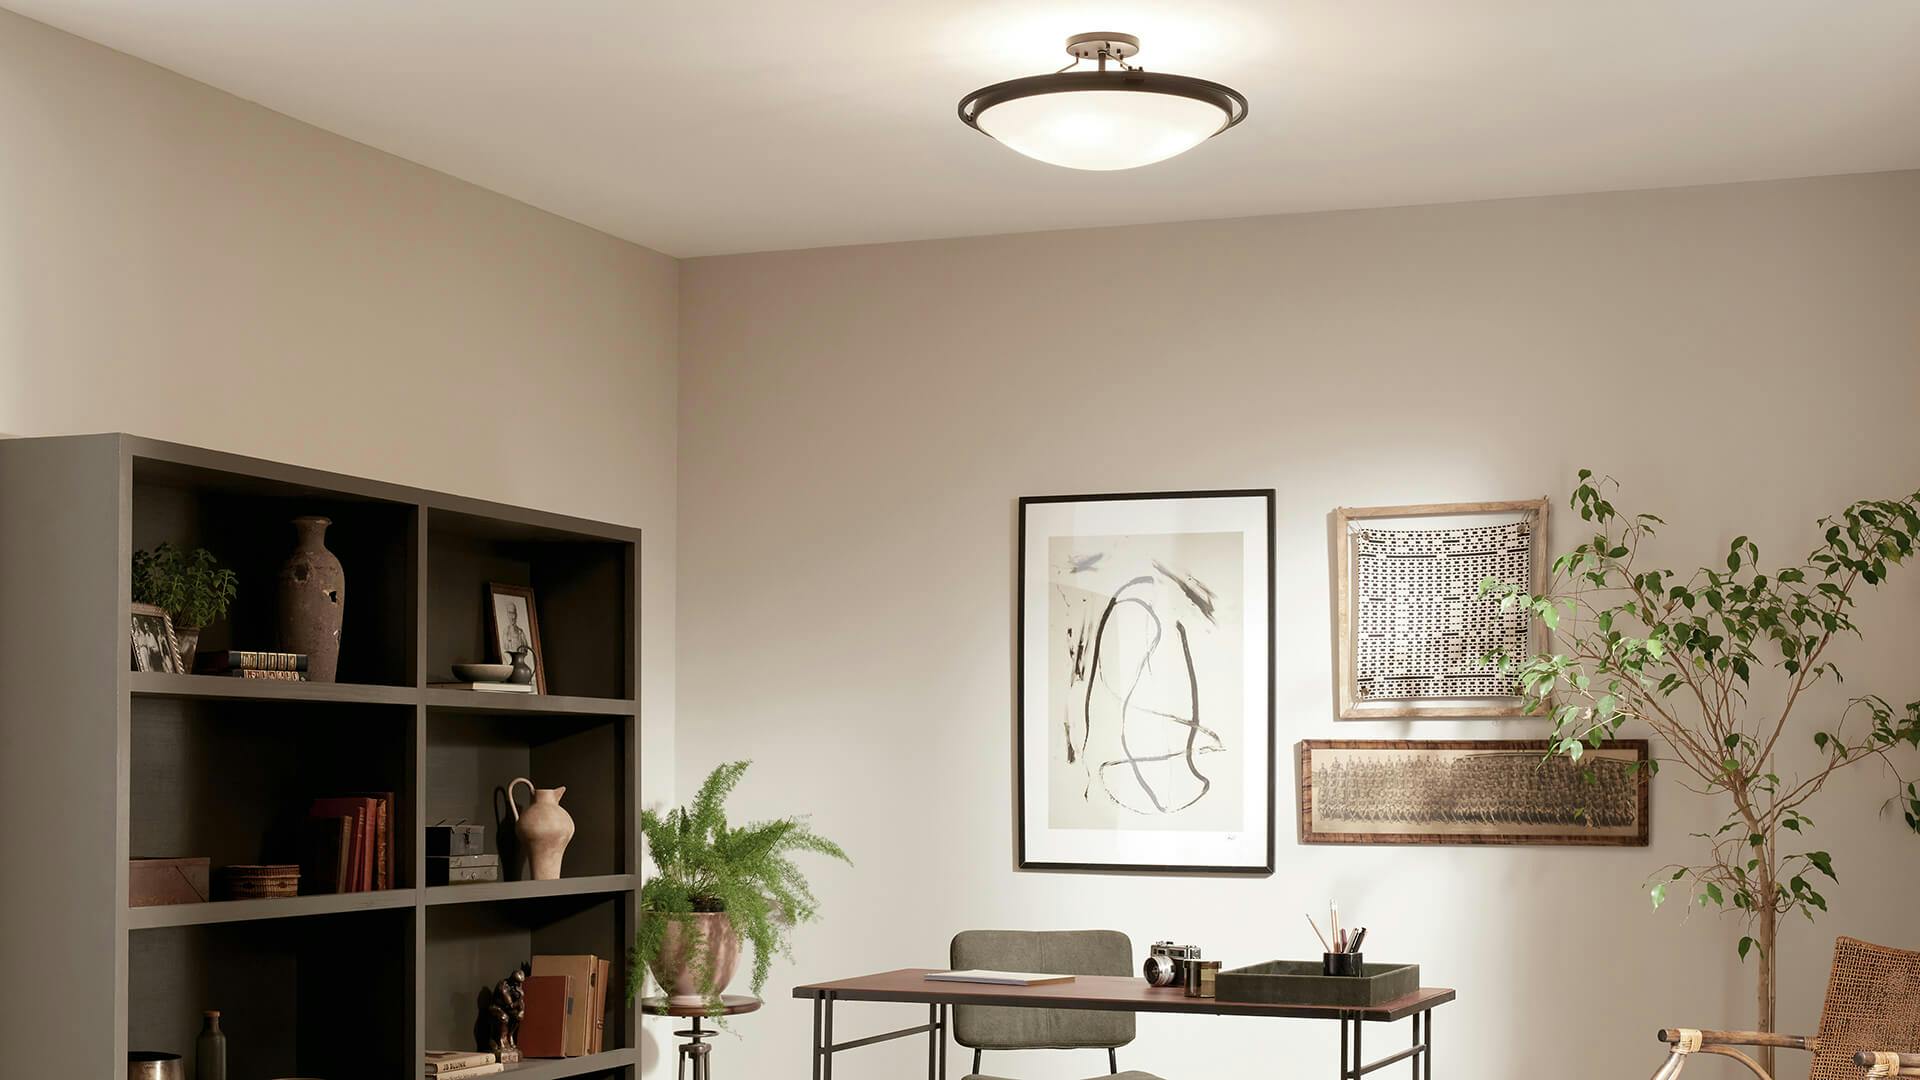 Office scene with a semi-flush ceiling light glowing above the room